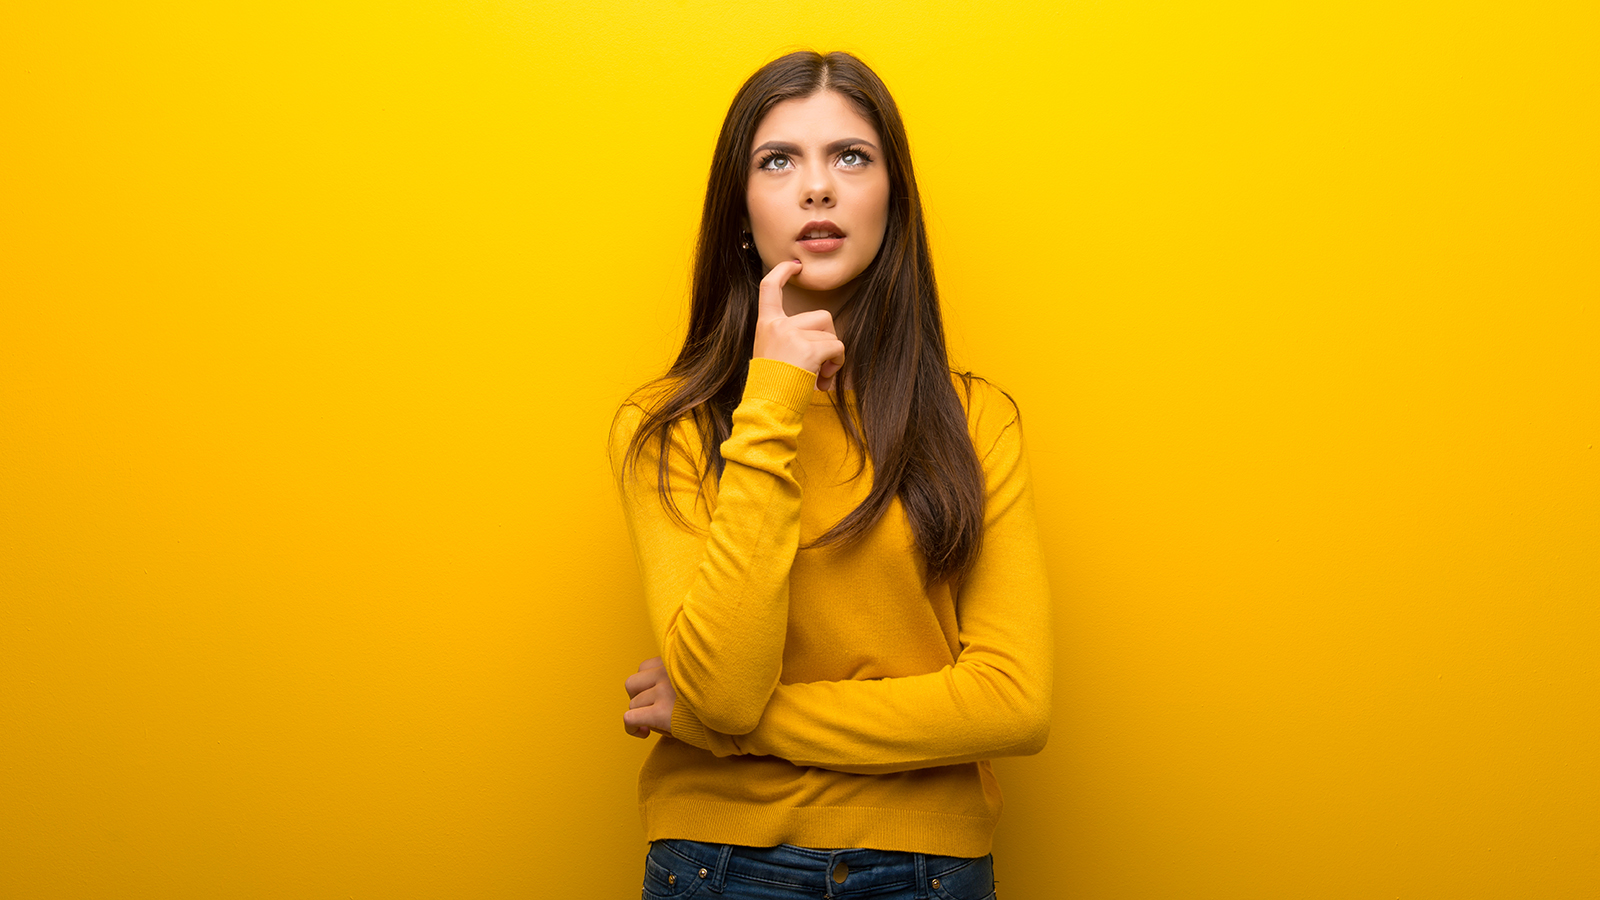 Teenager girl on vibrant yellow background having doubts while looking up